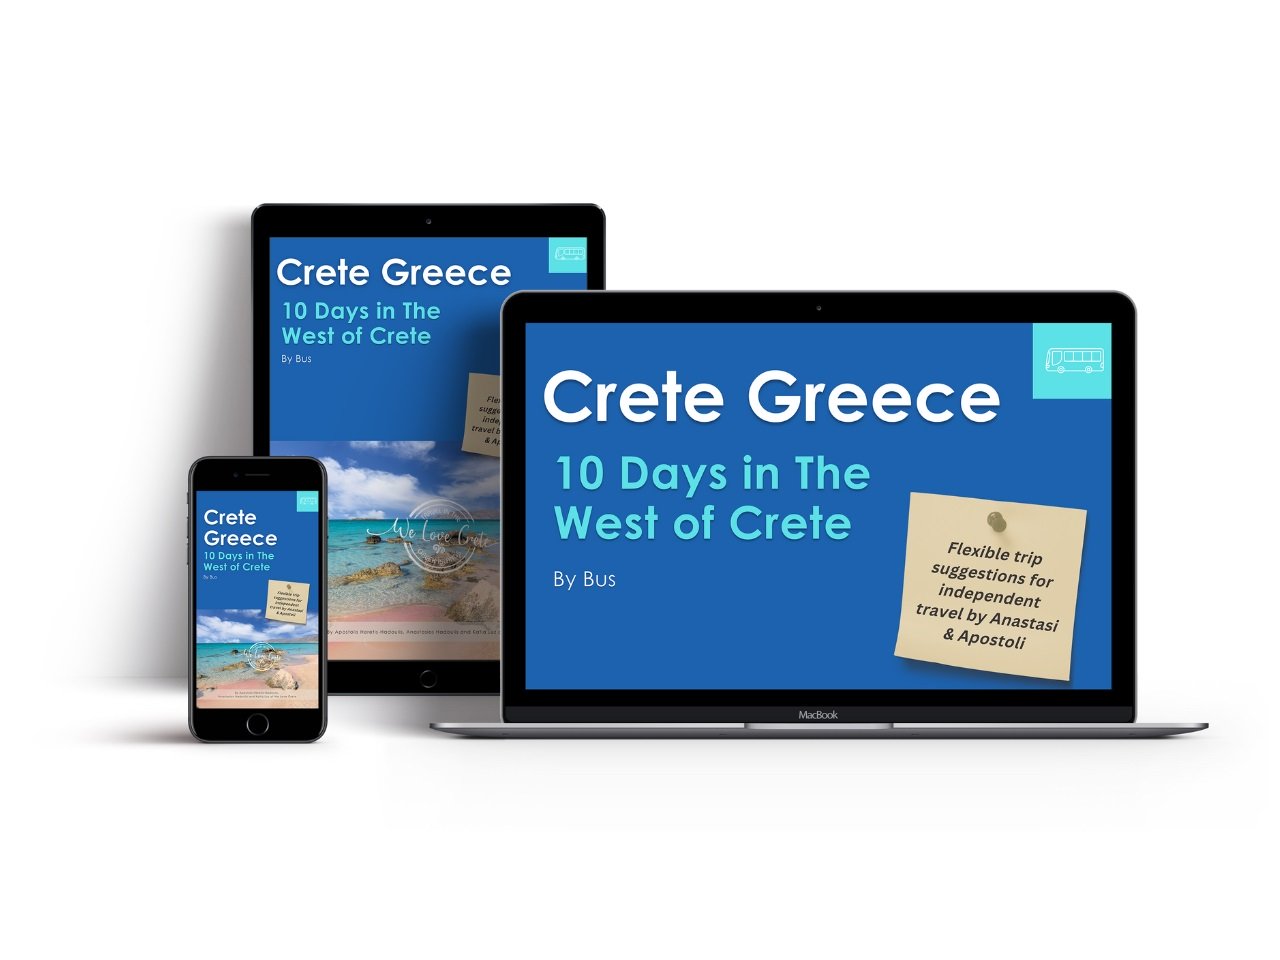 10 Days in the West of Crete by Bus - you can amend this to 5 or 7 days and take your own path